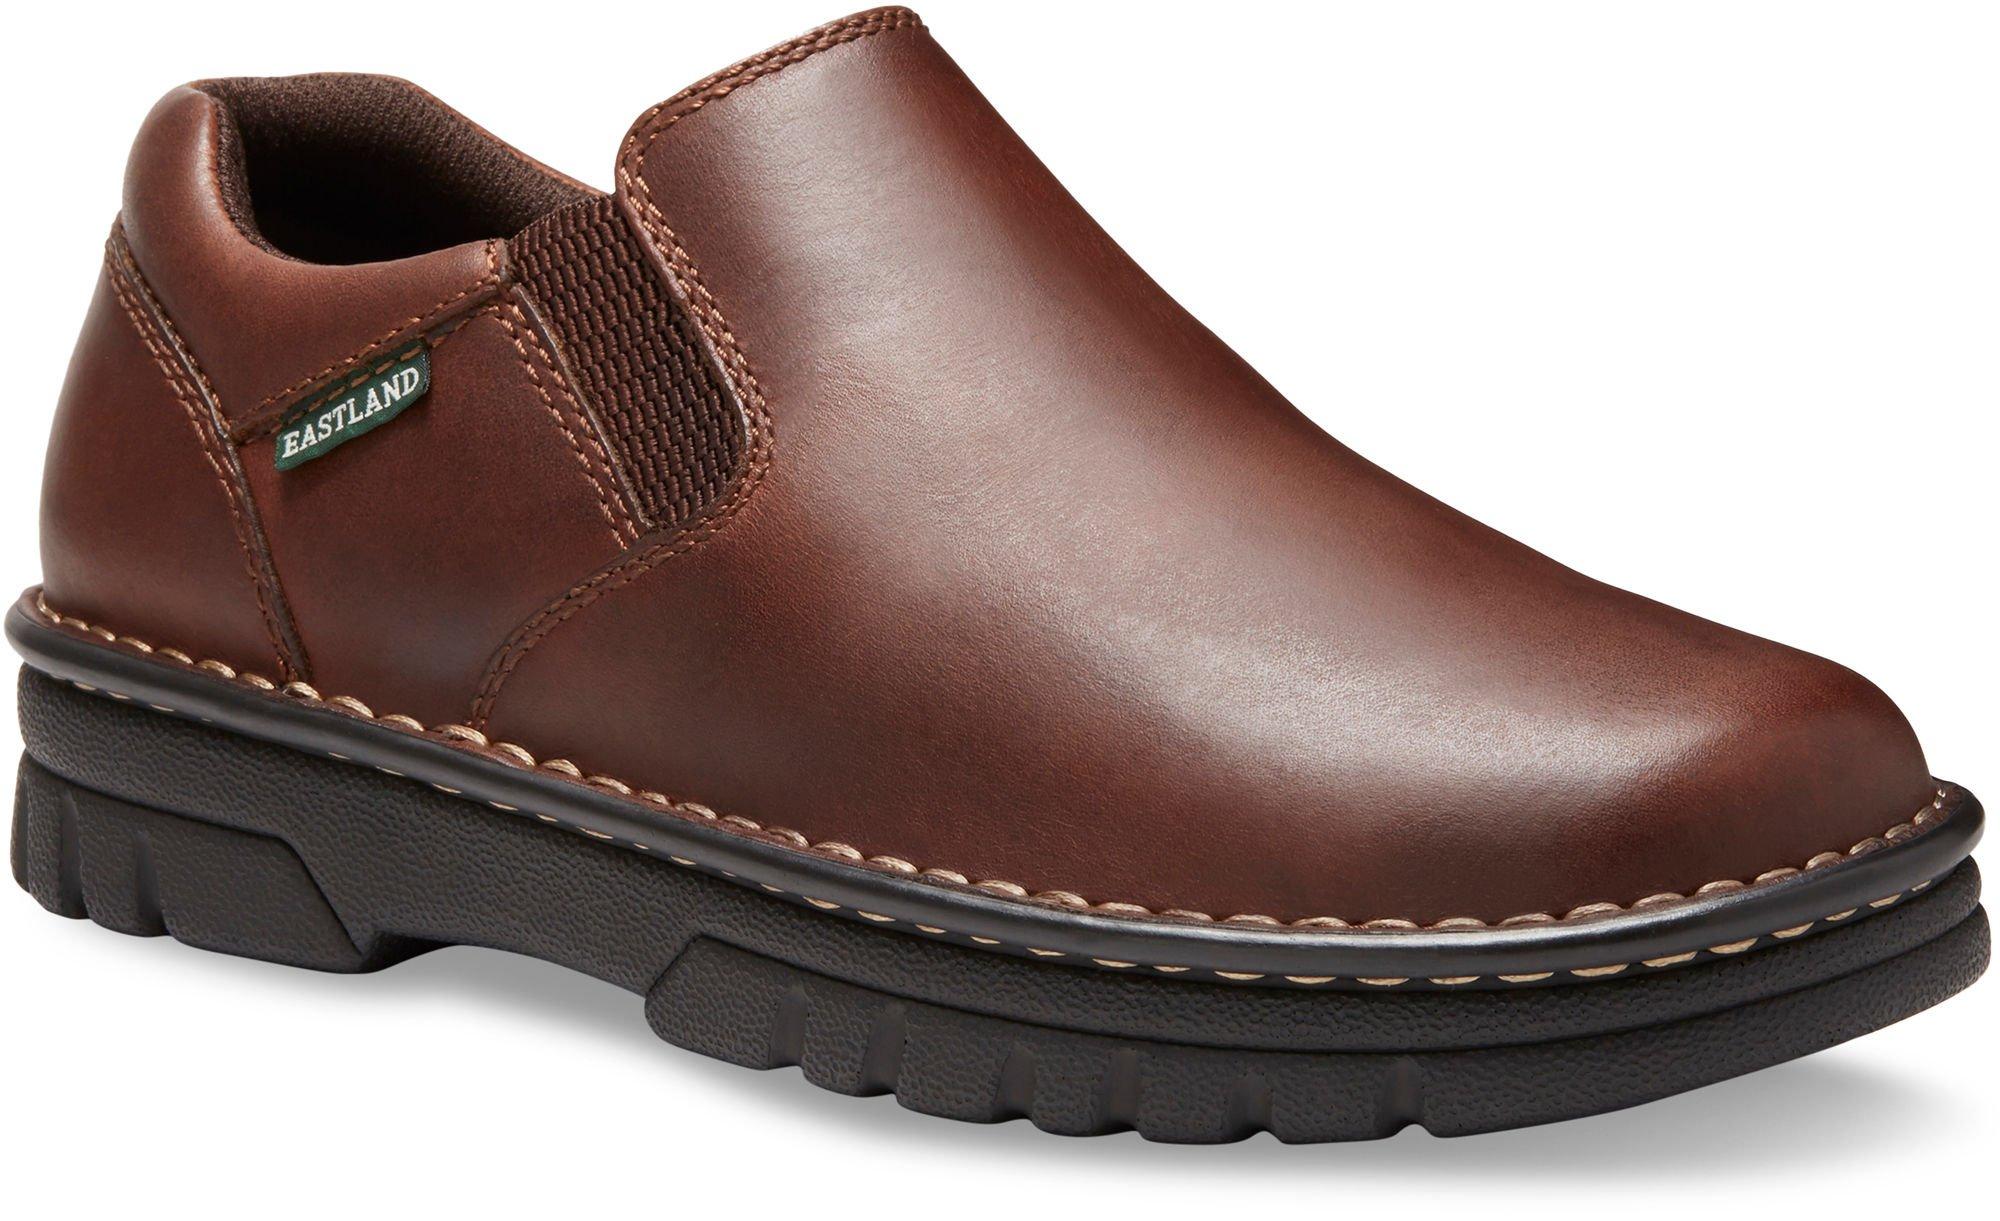 Mens Newport Loafers